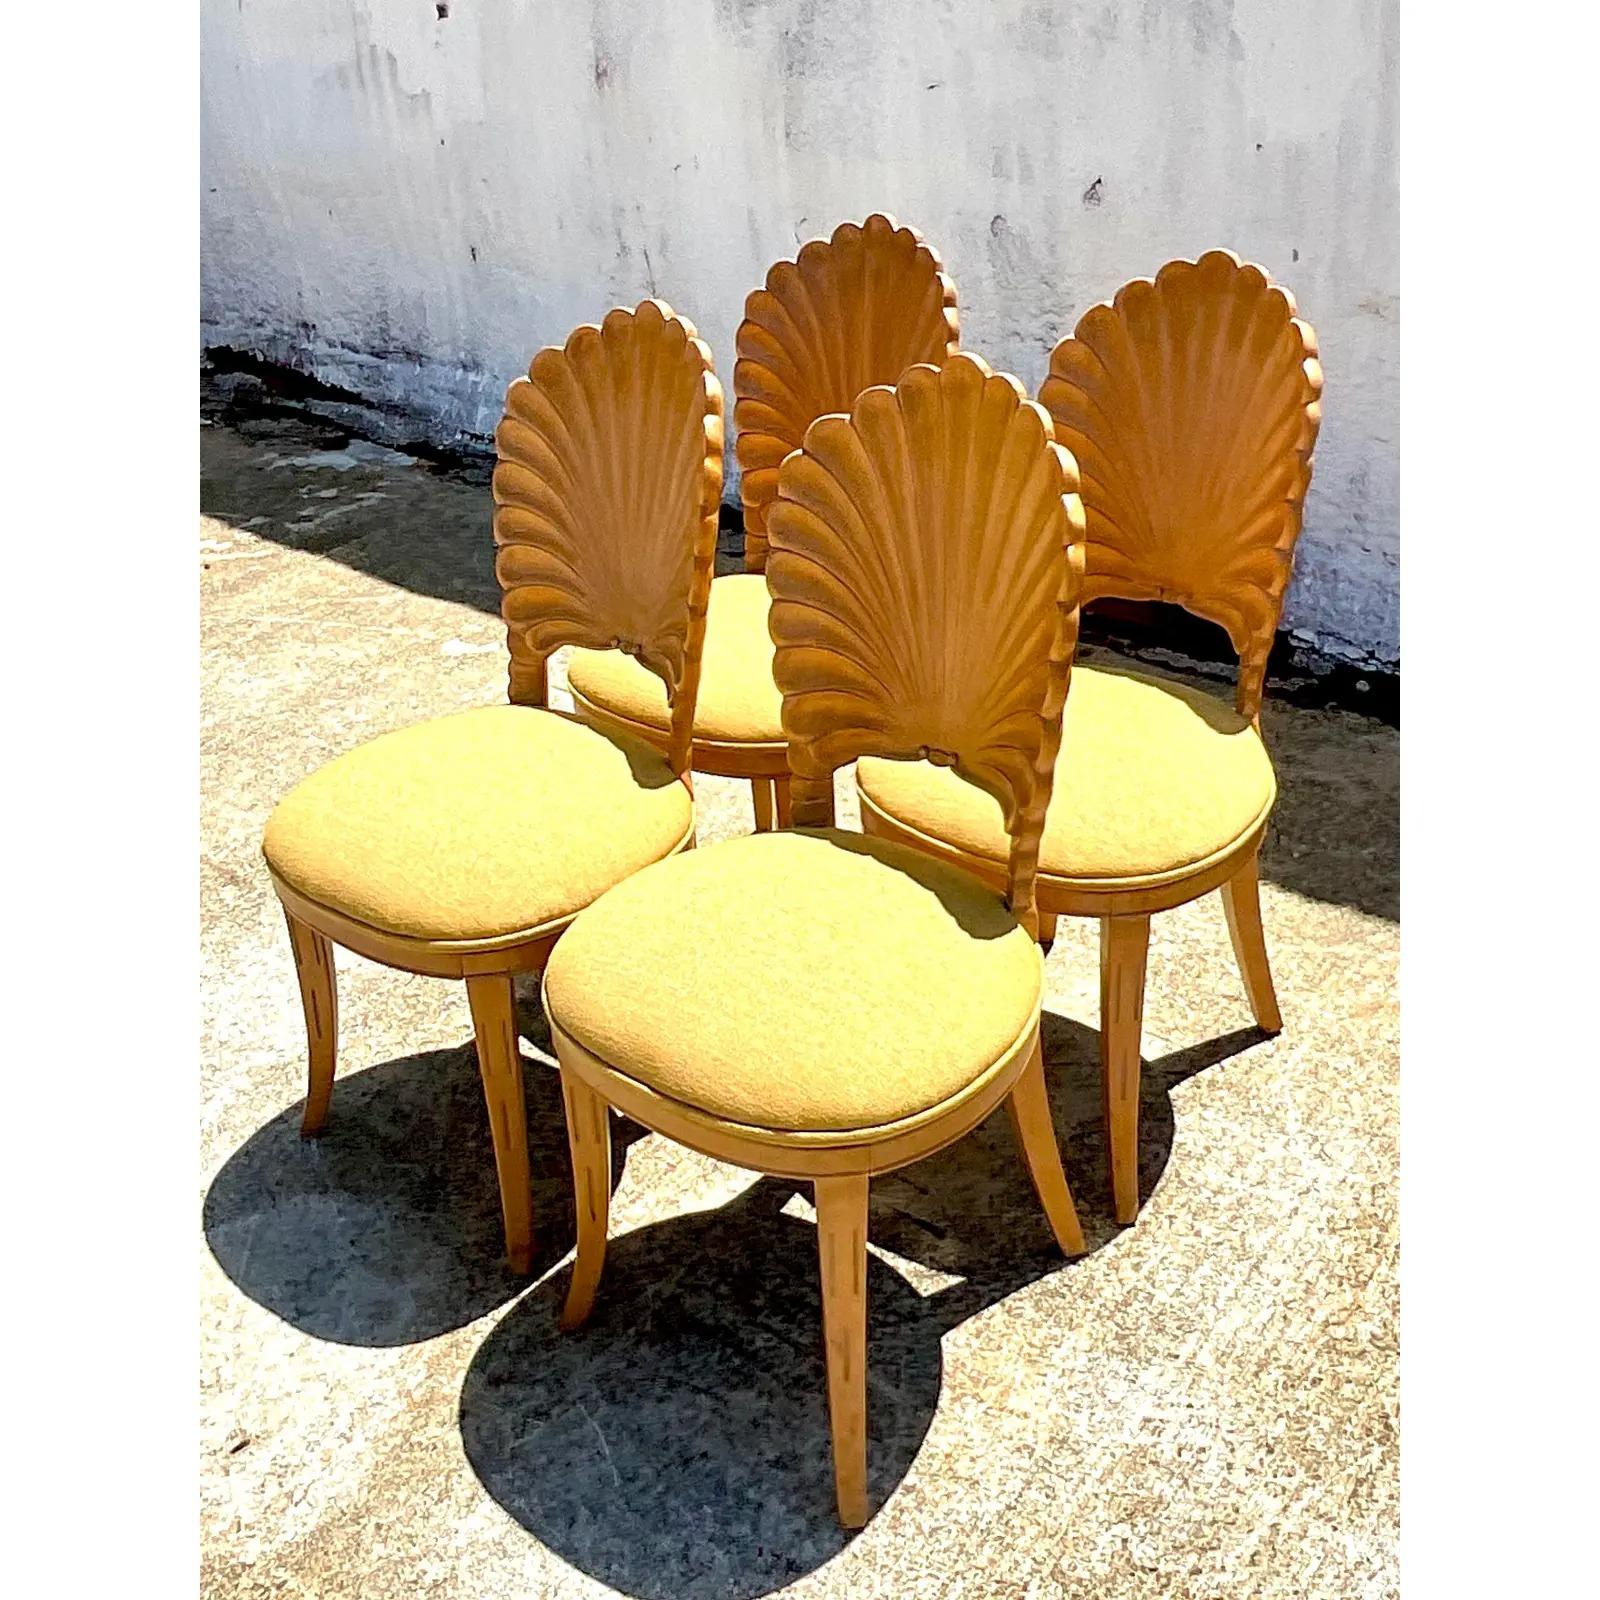 Incredible set of four vintage hand carved Grotto chairs. Beautiful iconic shape in a chic cerused finish. Acquired from a Palm Beach estate.